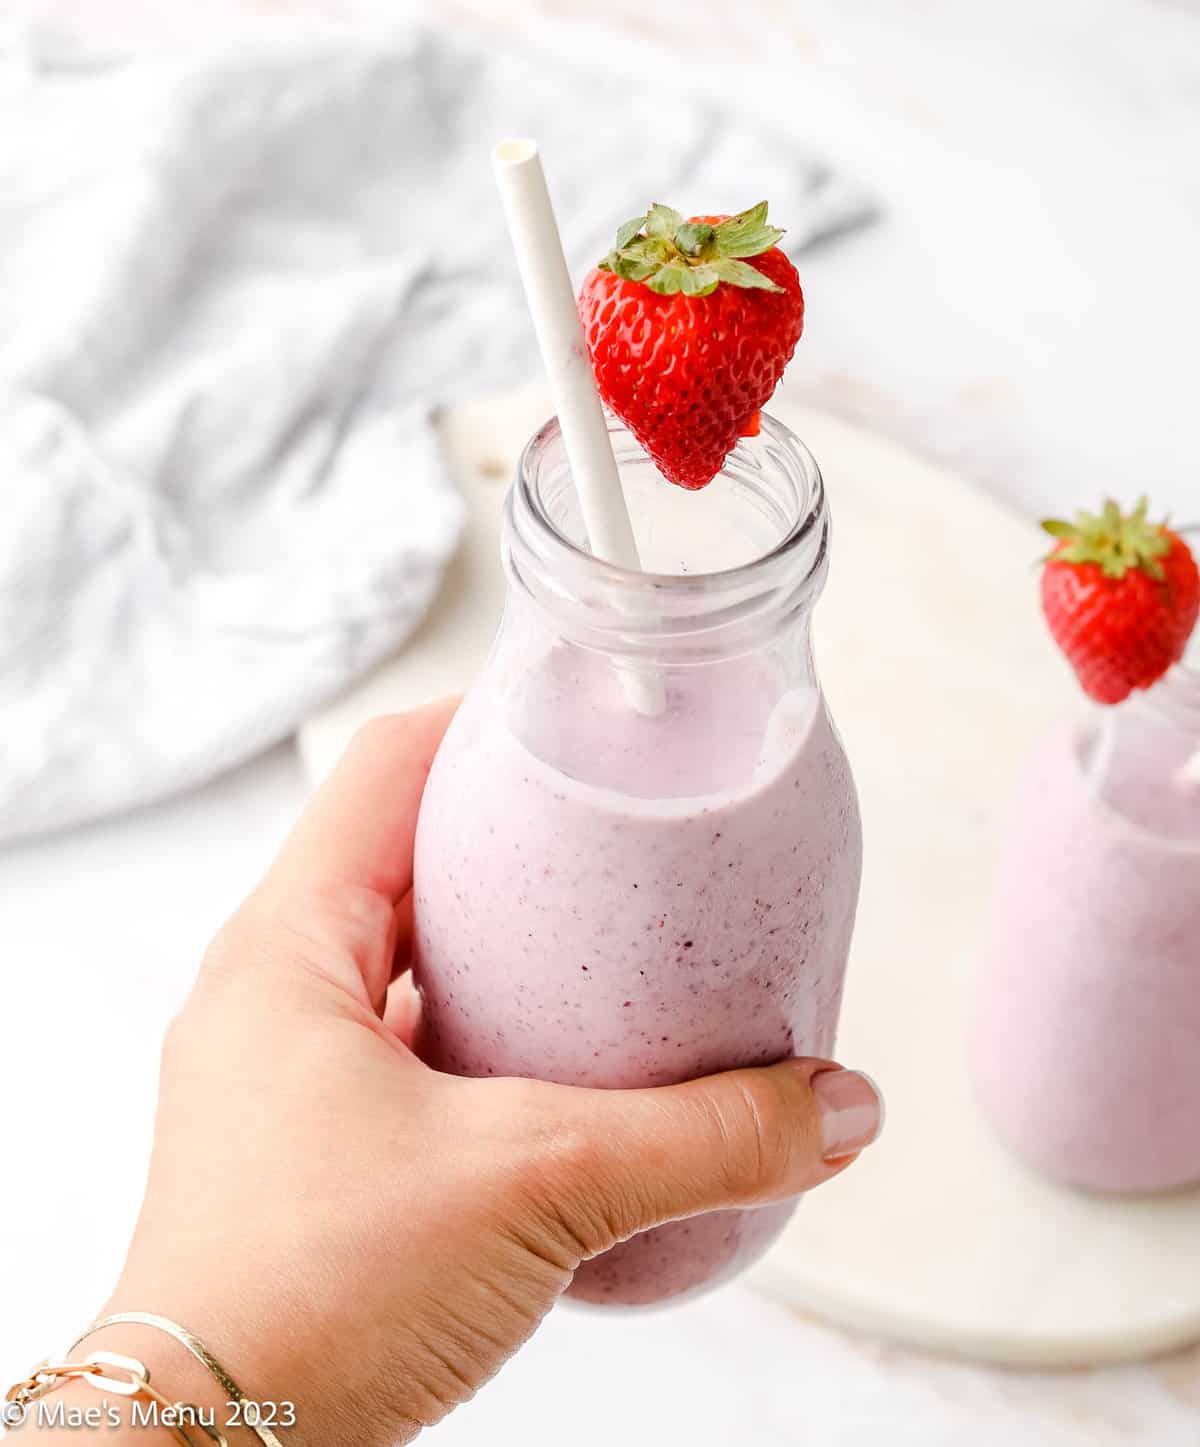 A hand holding a cottage cheese smoothie with a strawberry and a straw.